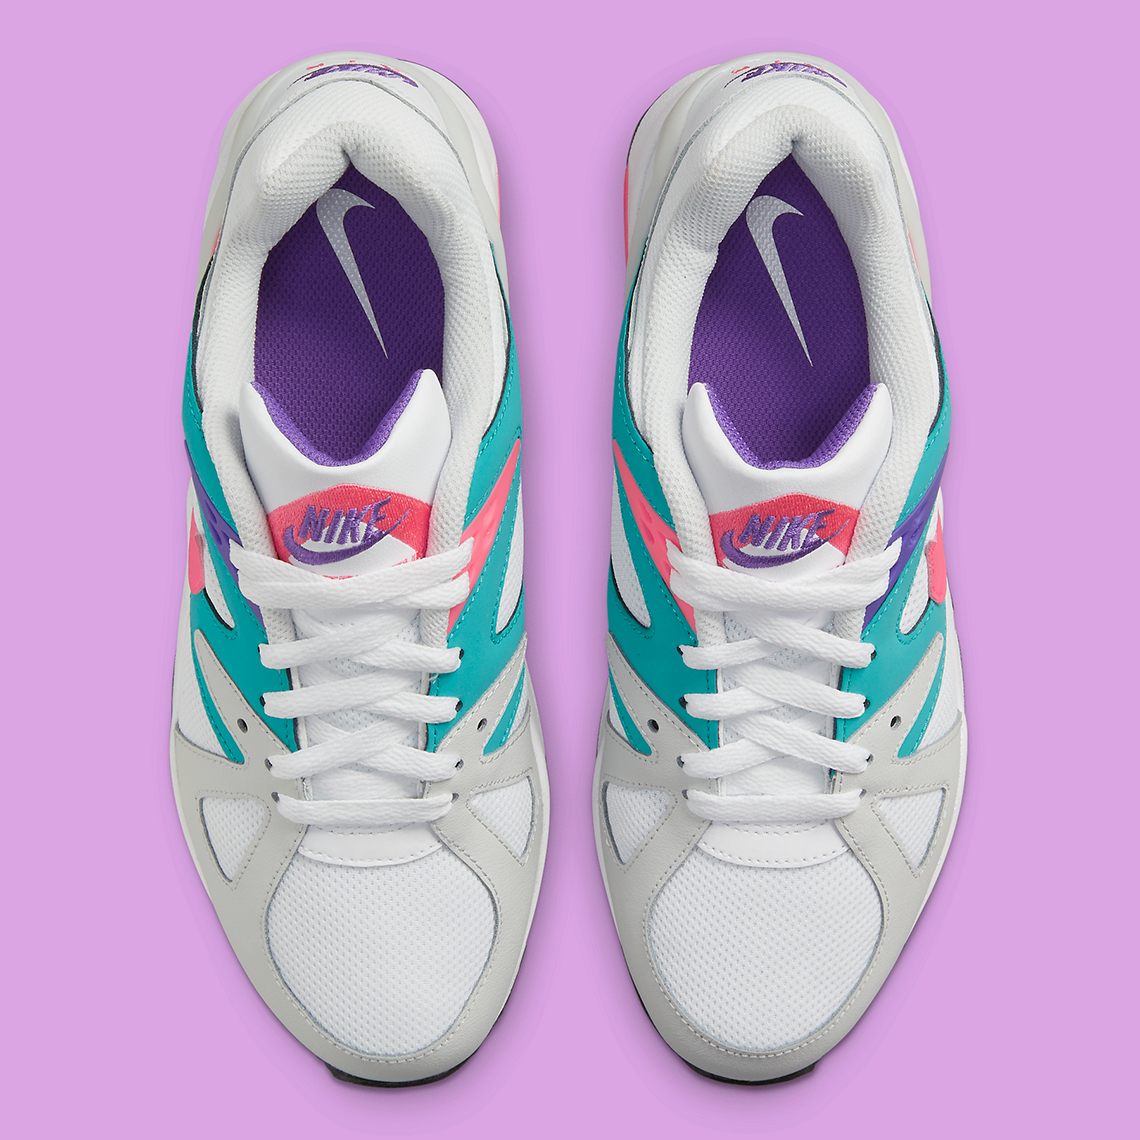 Retro Colors Galore On This Women’s Nike Air Structure Triax ’91